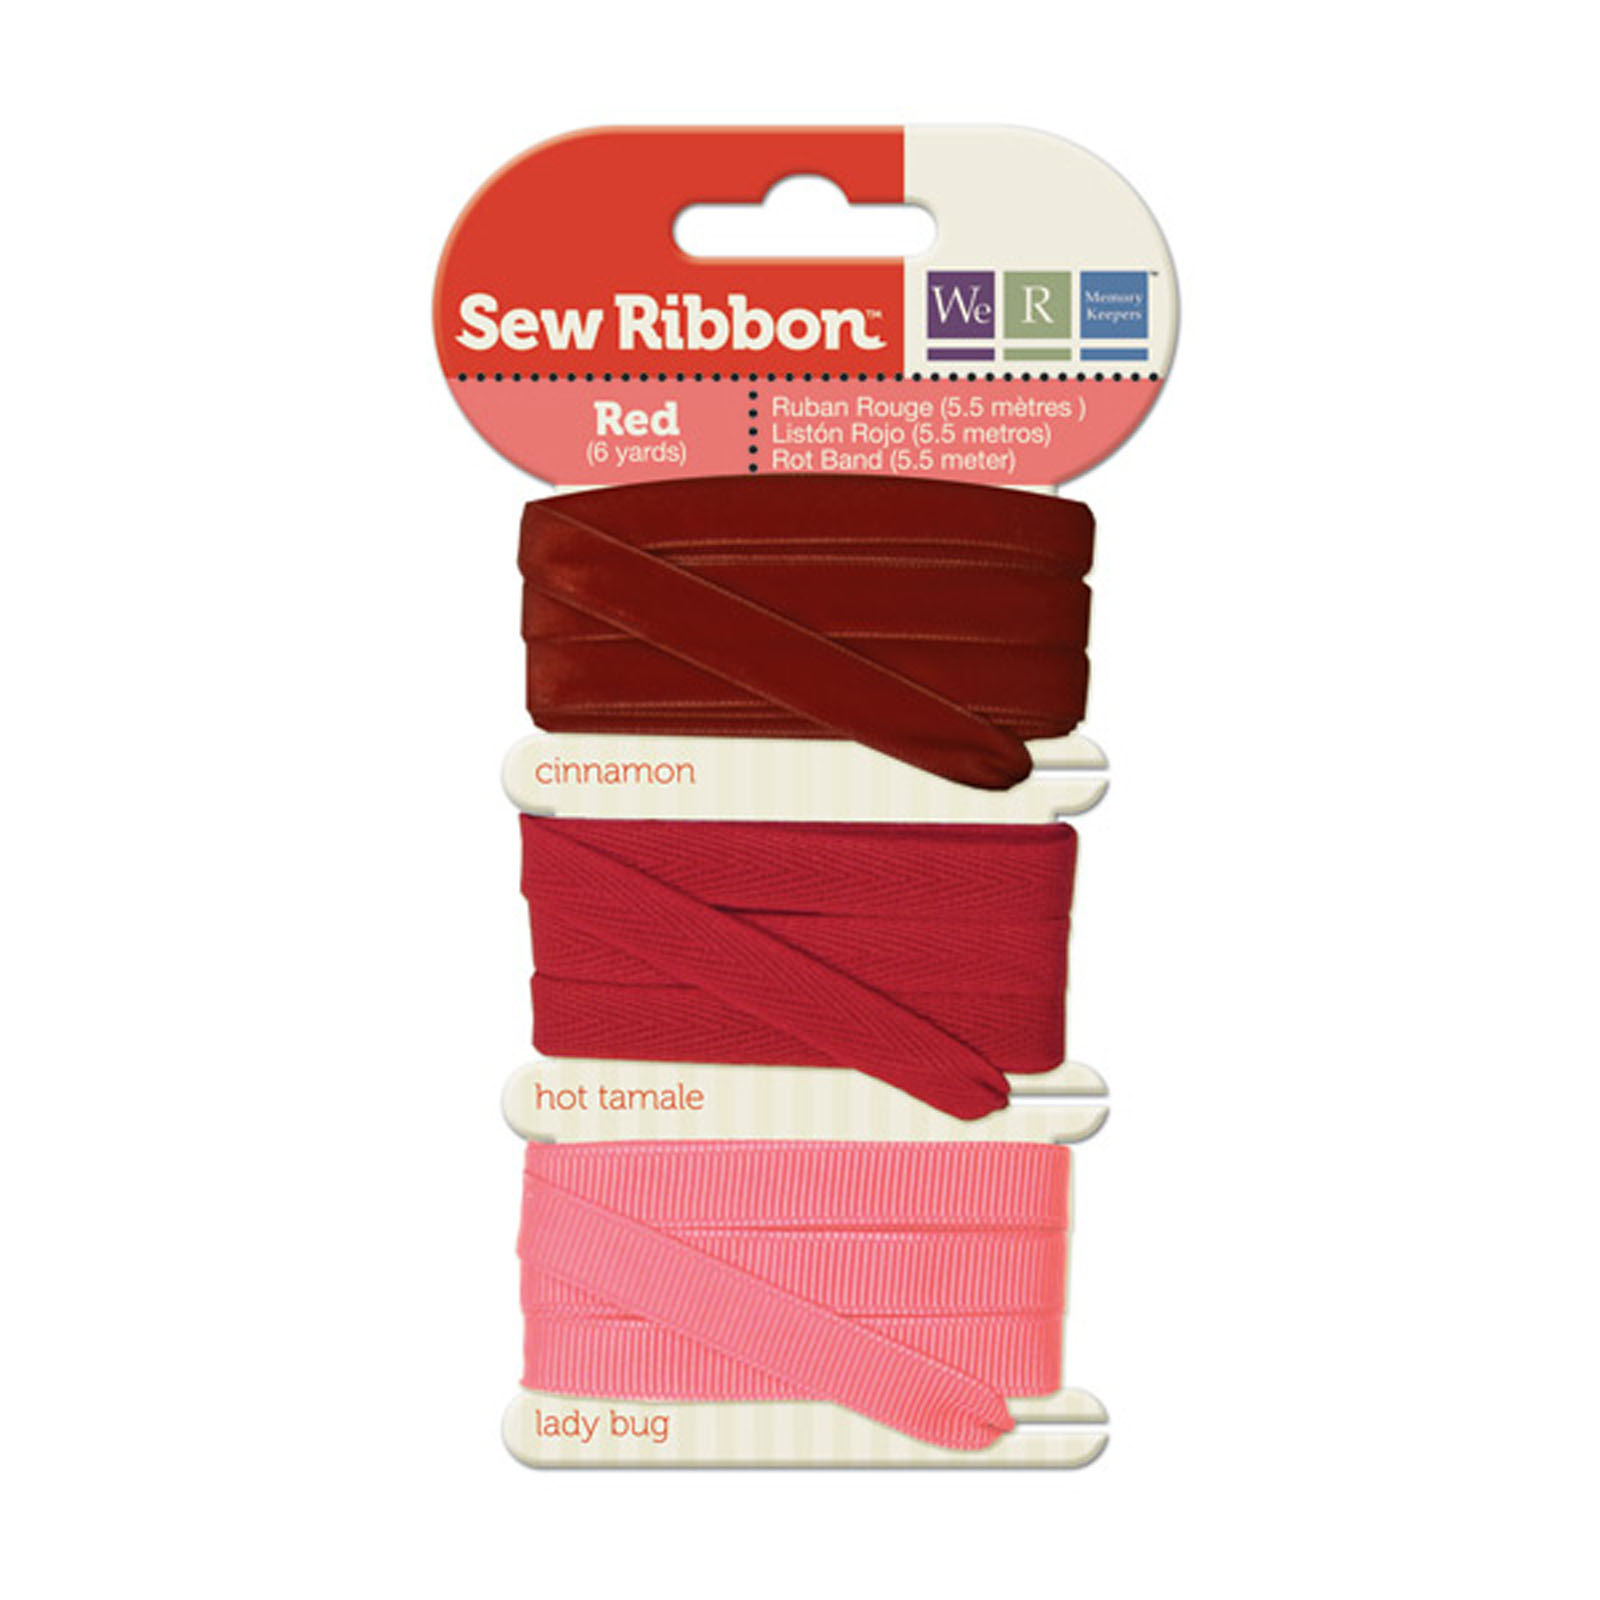 We R Makers • Sew Ribbon Ribbonset 5.5m Red